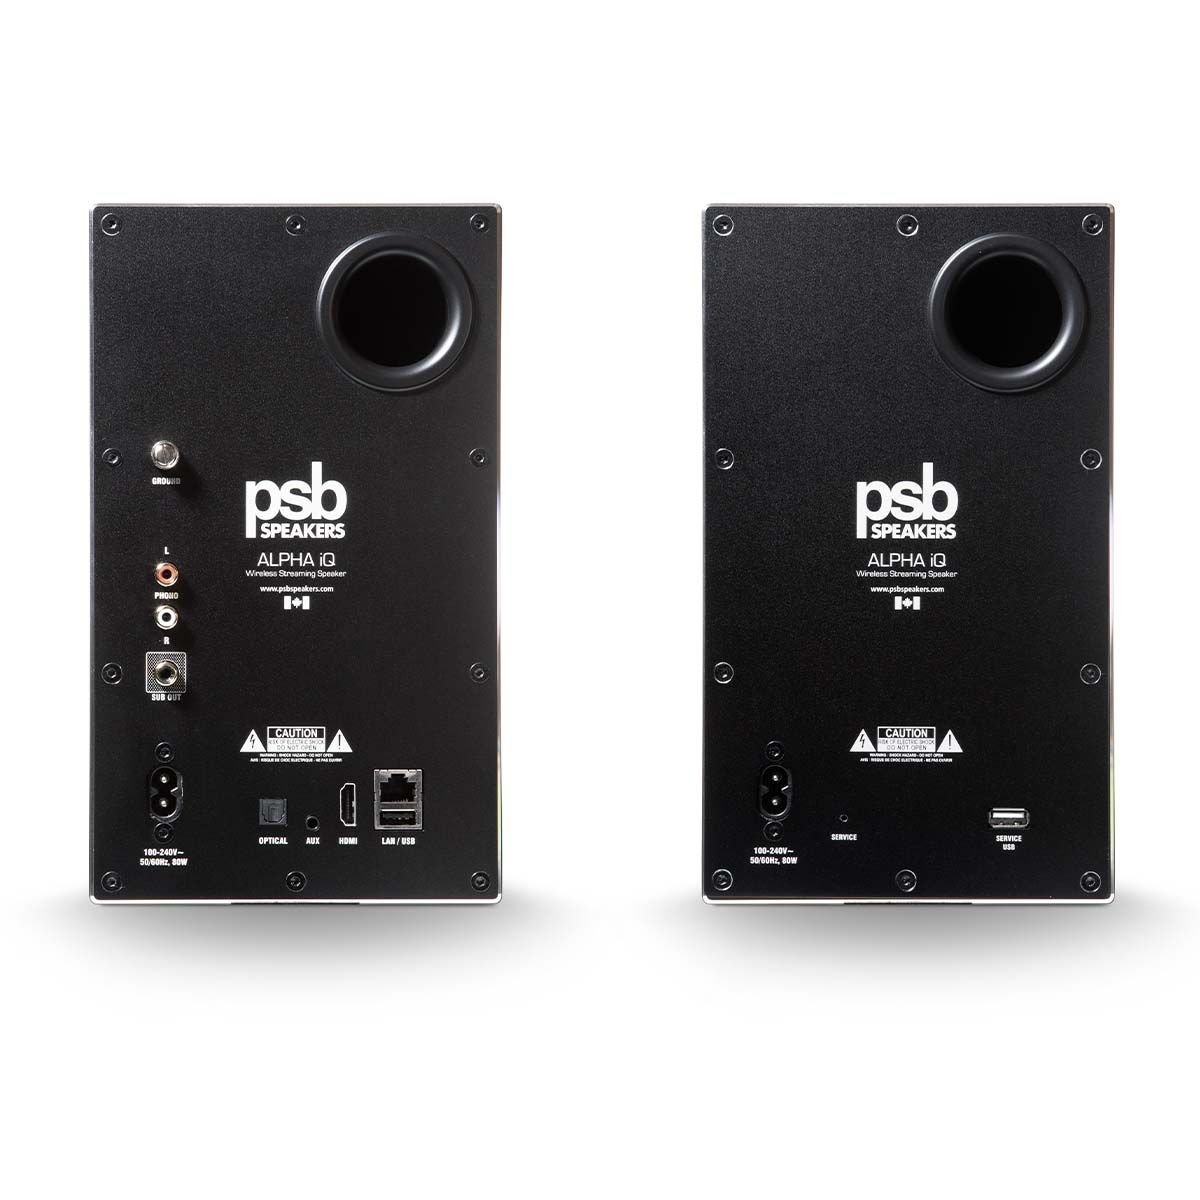 PSB Alpha iQ Streaming Powered Speakers - black pair - rear component view